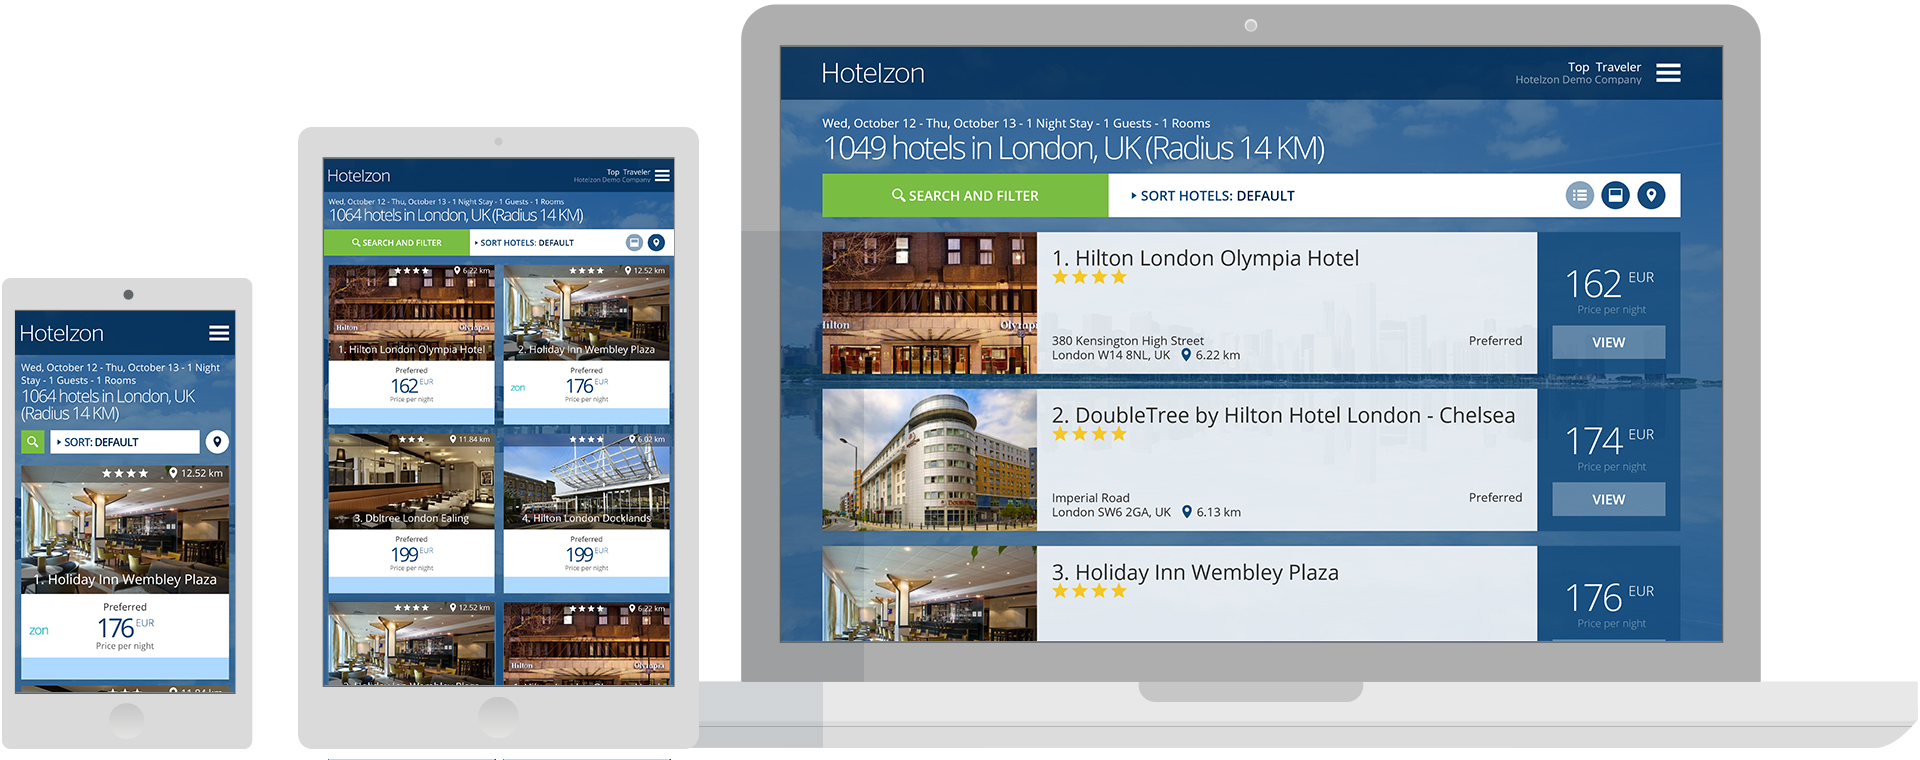 Travelport Hotelzon releases newly designed hotel booking app 